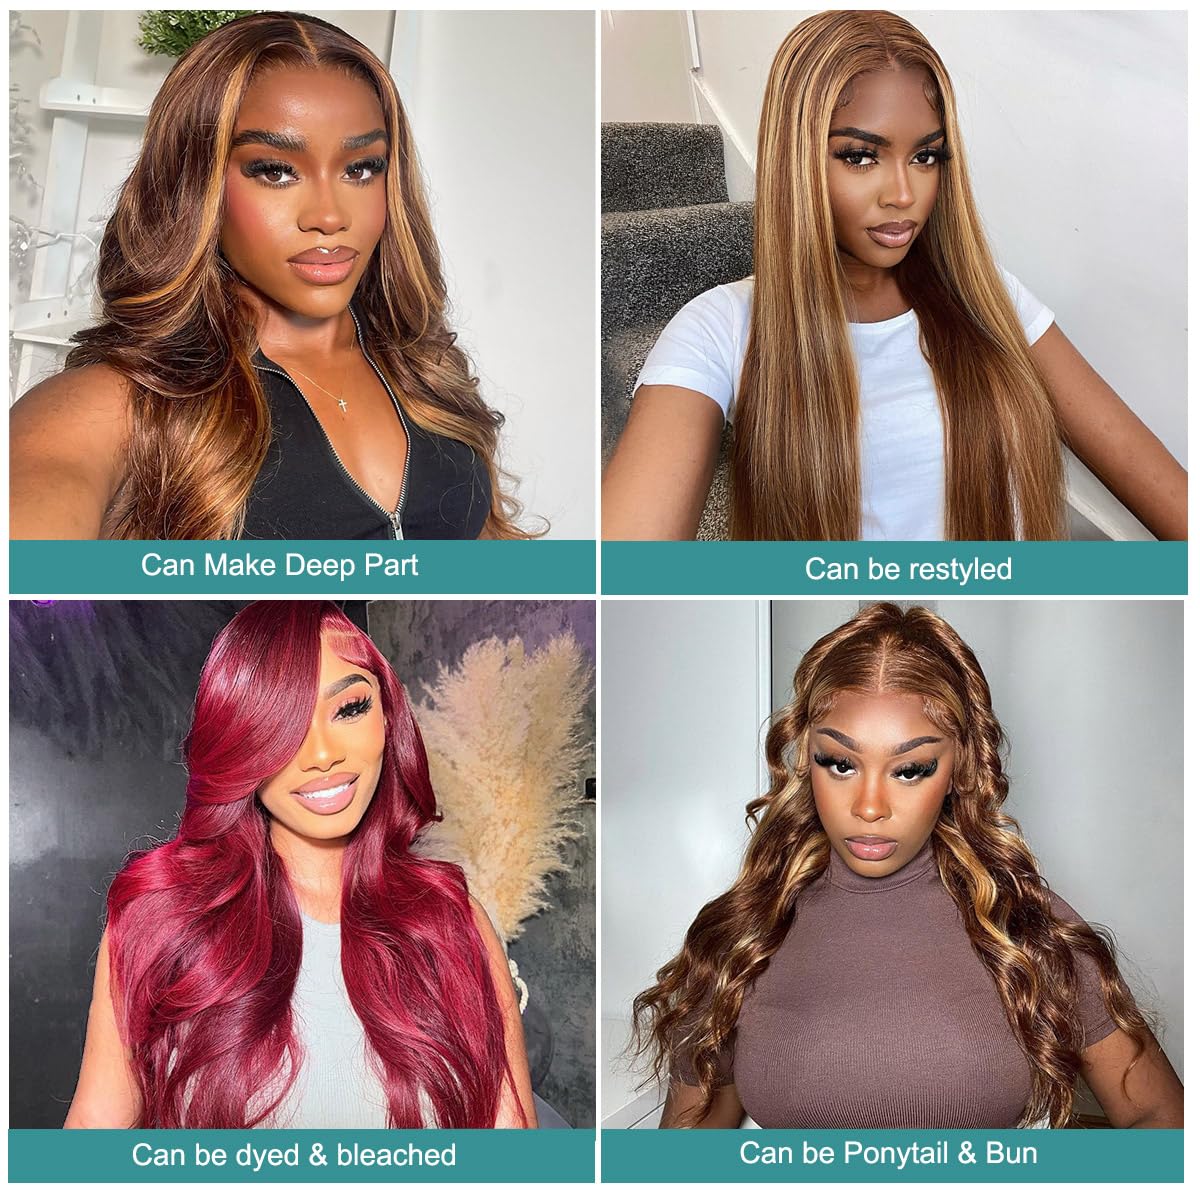 Beauty & personal Care, Hair Care, Hair Extensions, Hair replacement, Wigs & Accessories,Glueless Wigs Human Hair Pre Plucked Pre Cut 24 Inch 5x5 HD Lace Closure Wigs Human Hair 180% Density Body Wave Lace Front Wig, 4/27 Ombre Highlight Honey Blonde Wig, ALL THAT & MORE CUSTOM HAIR EXTENSIONS, HAIRPIECES, WEAVES & WIG SALON SERVICES, Free lace front Wig Install service near me voucher, wig of the month deal, coupon, discounts